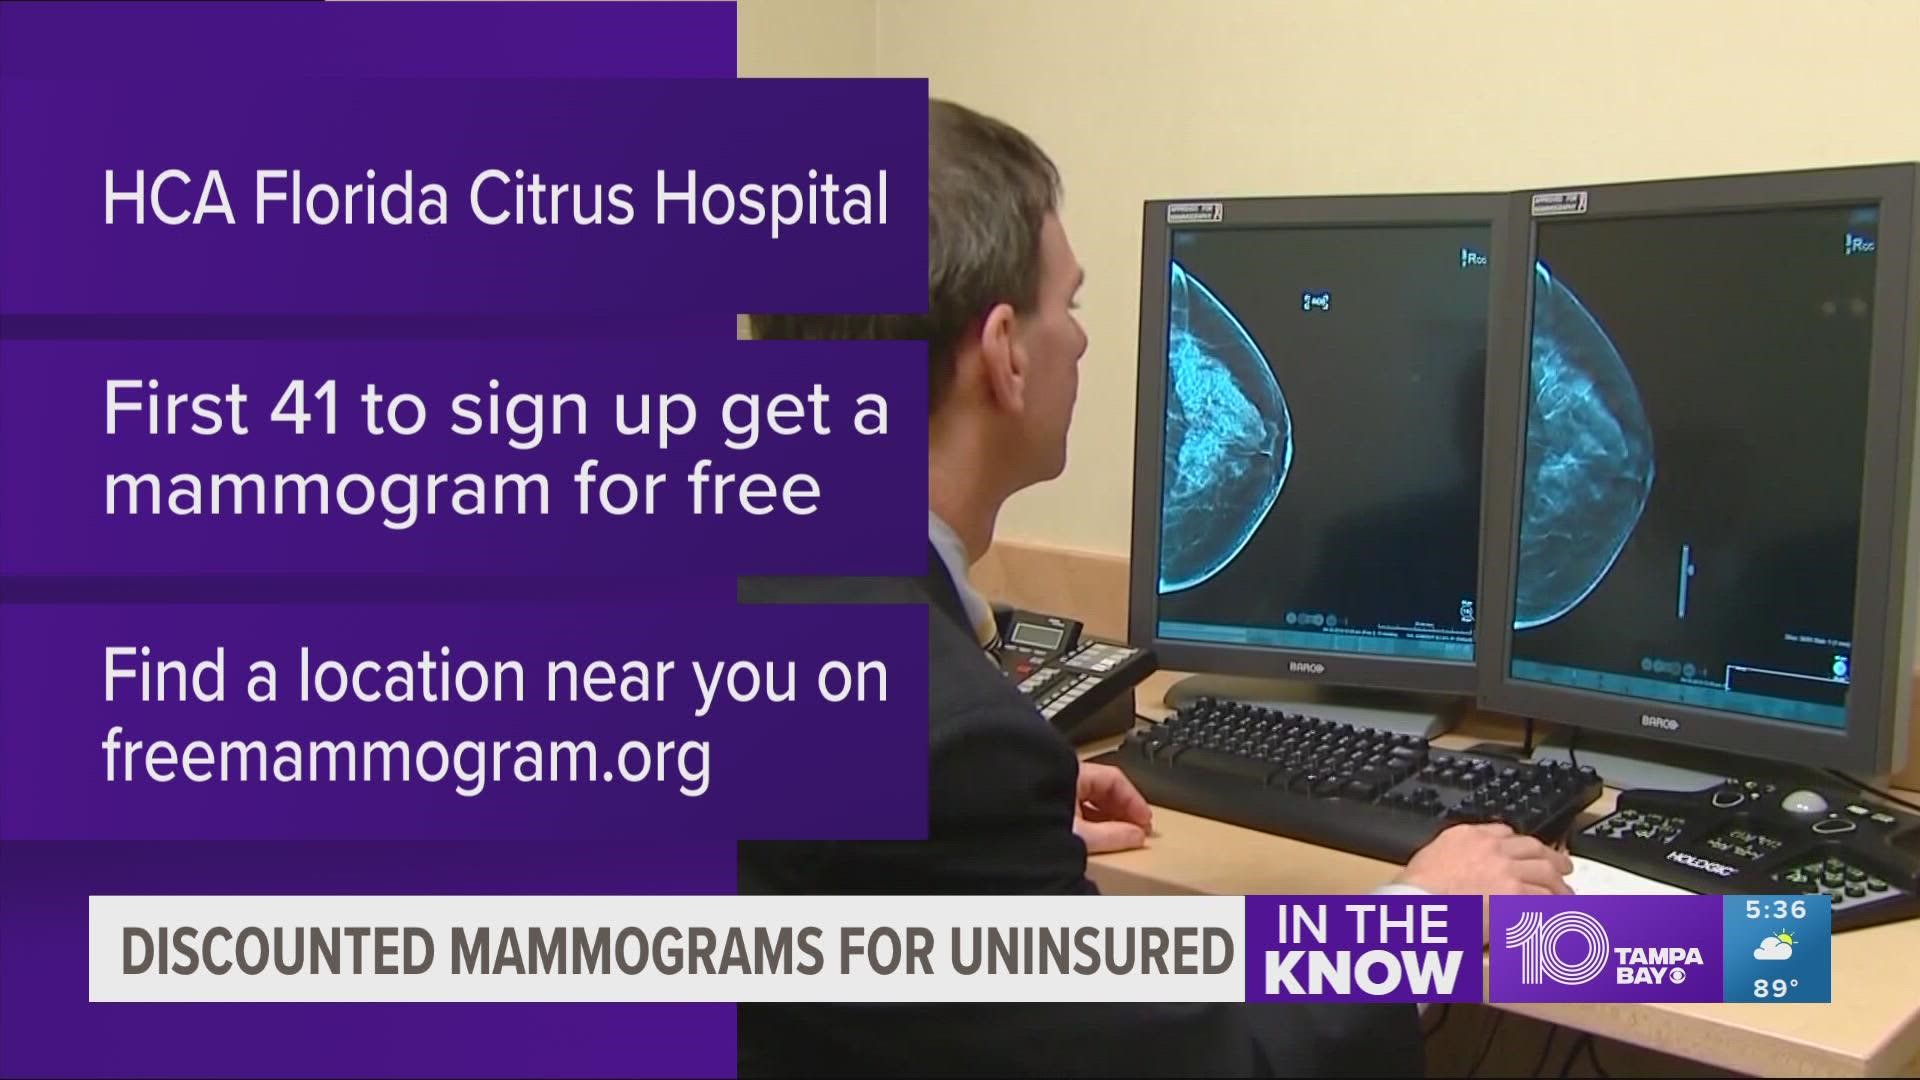 Mammograms can be scheduled by calling 877-351-7012 with a physician referral.